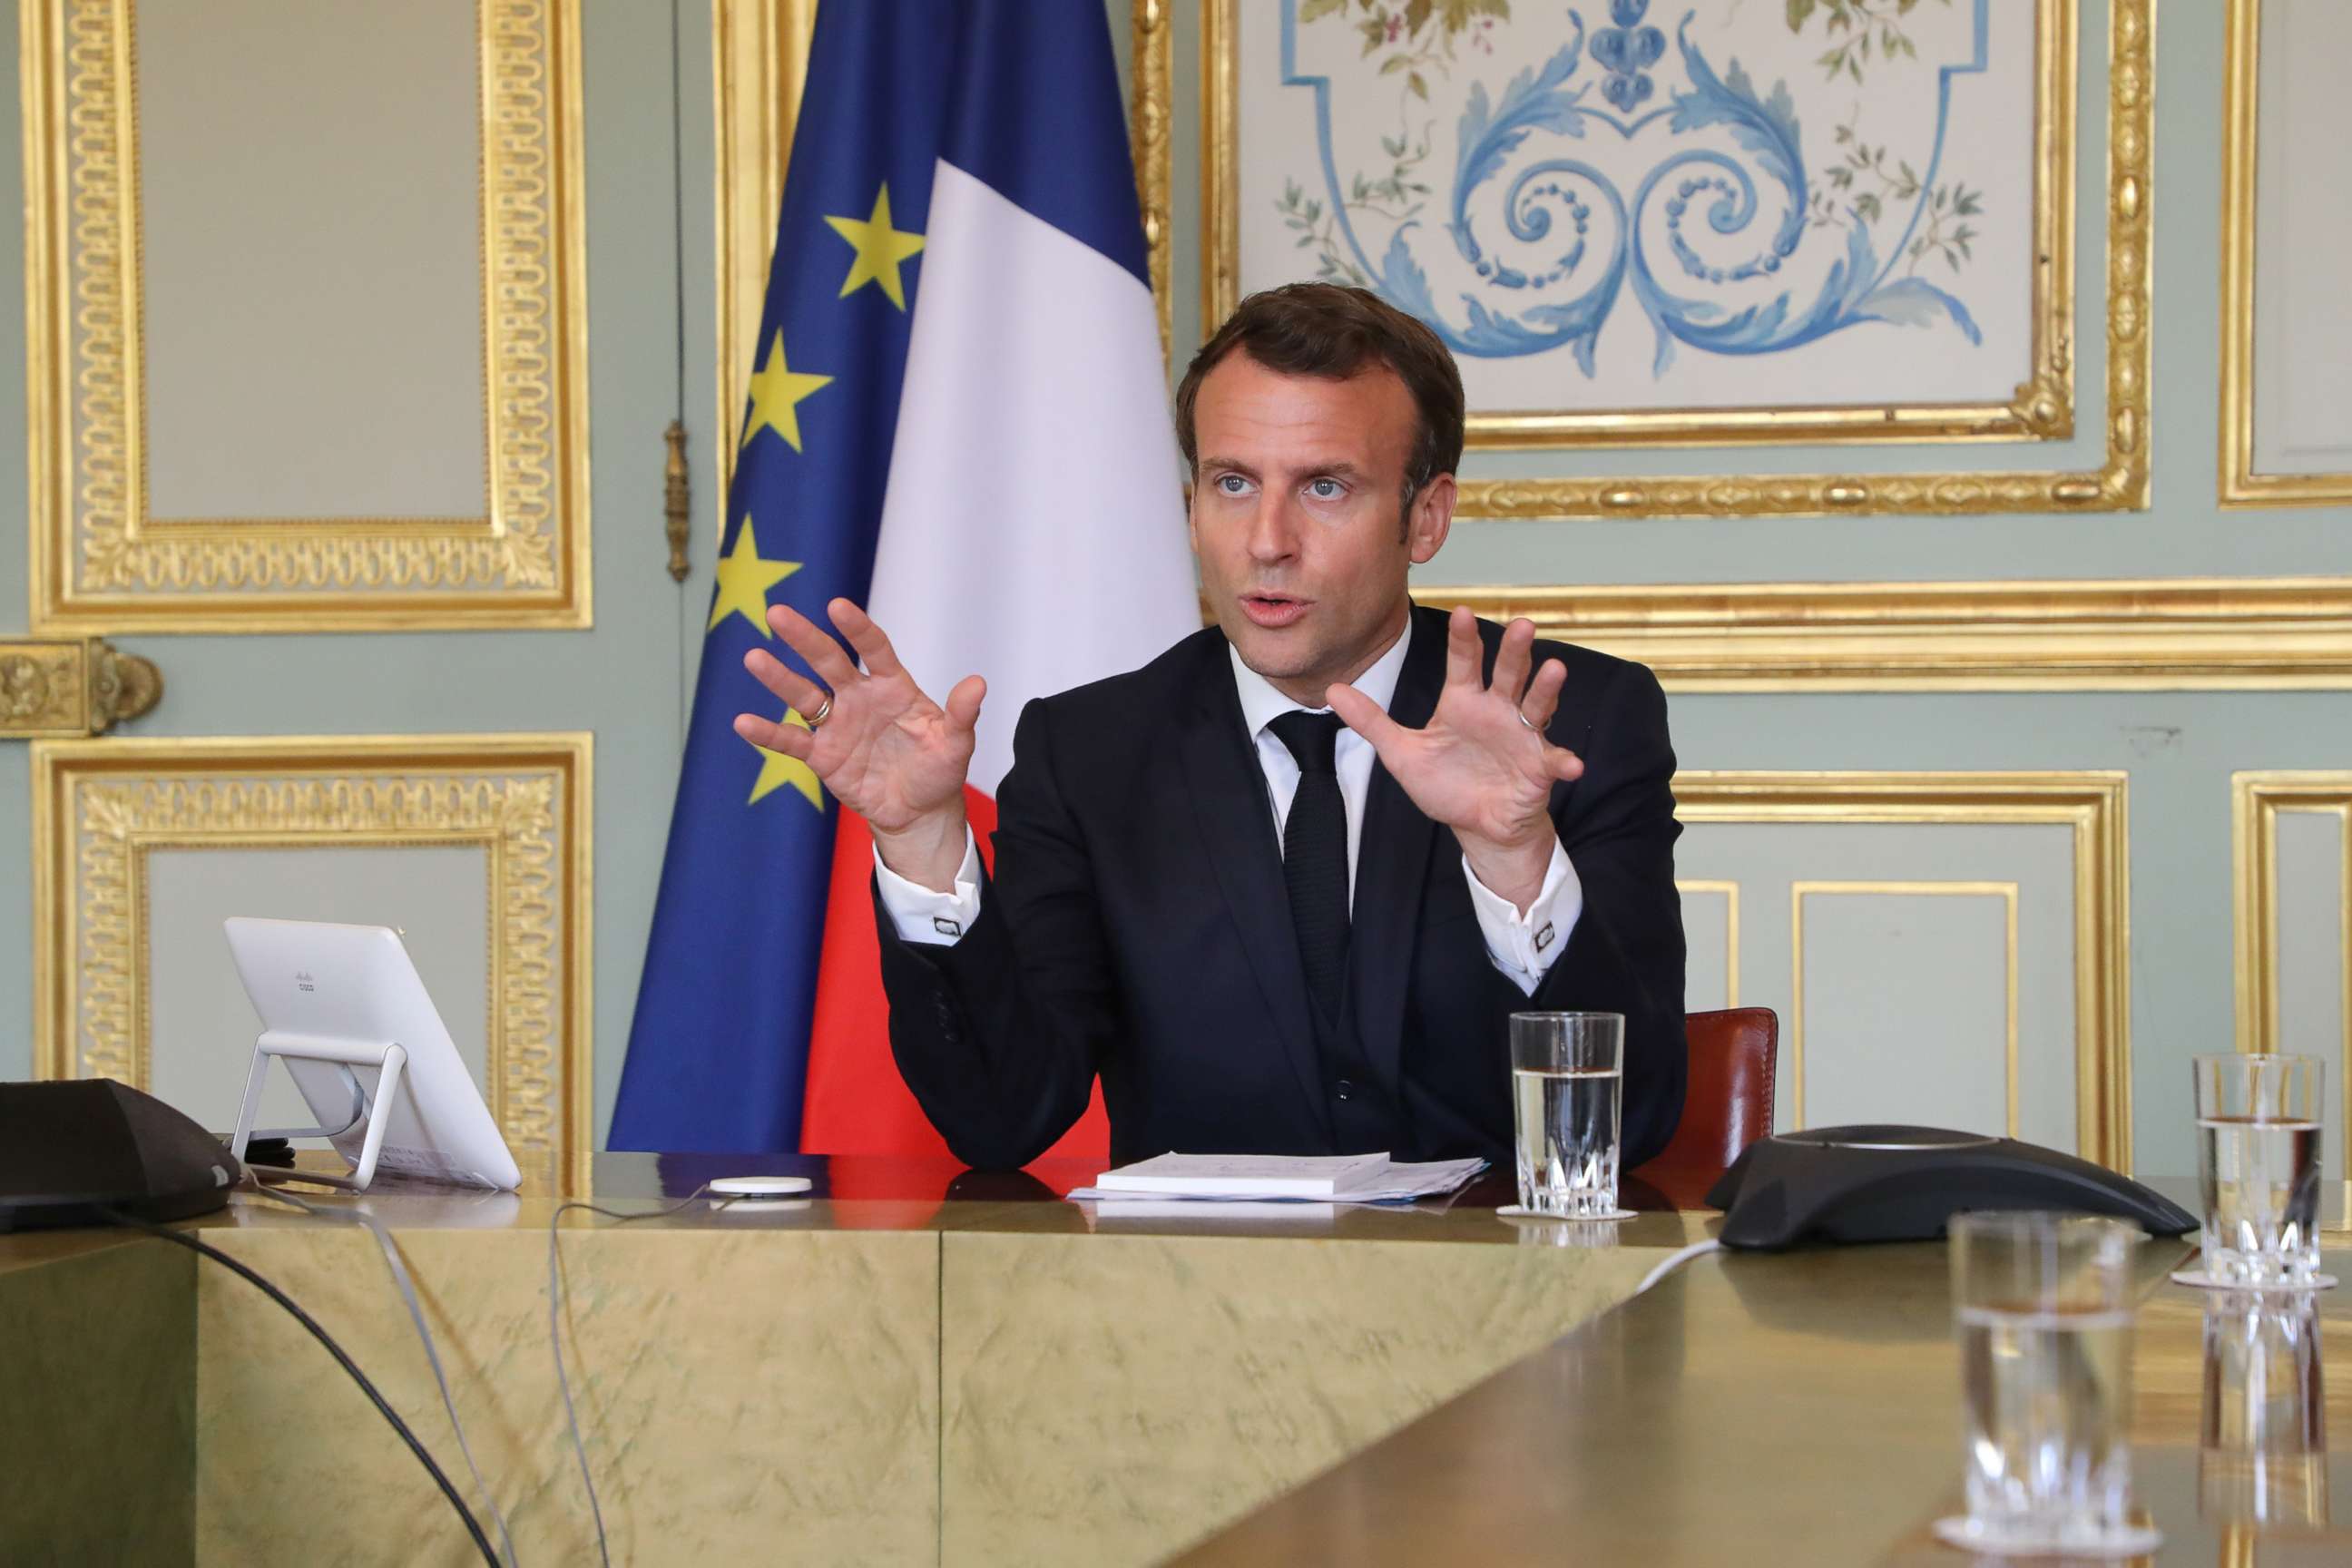 PHOTO: French President Emmanuel Macron takes part in a video conference at the Elysee Palace in Paris, April 8, 2020.